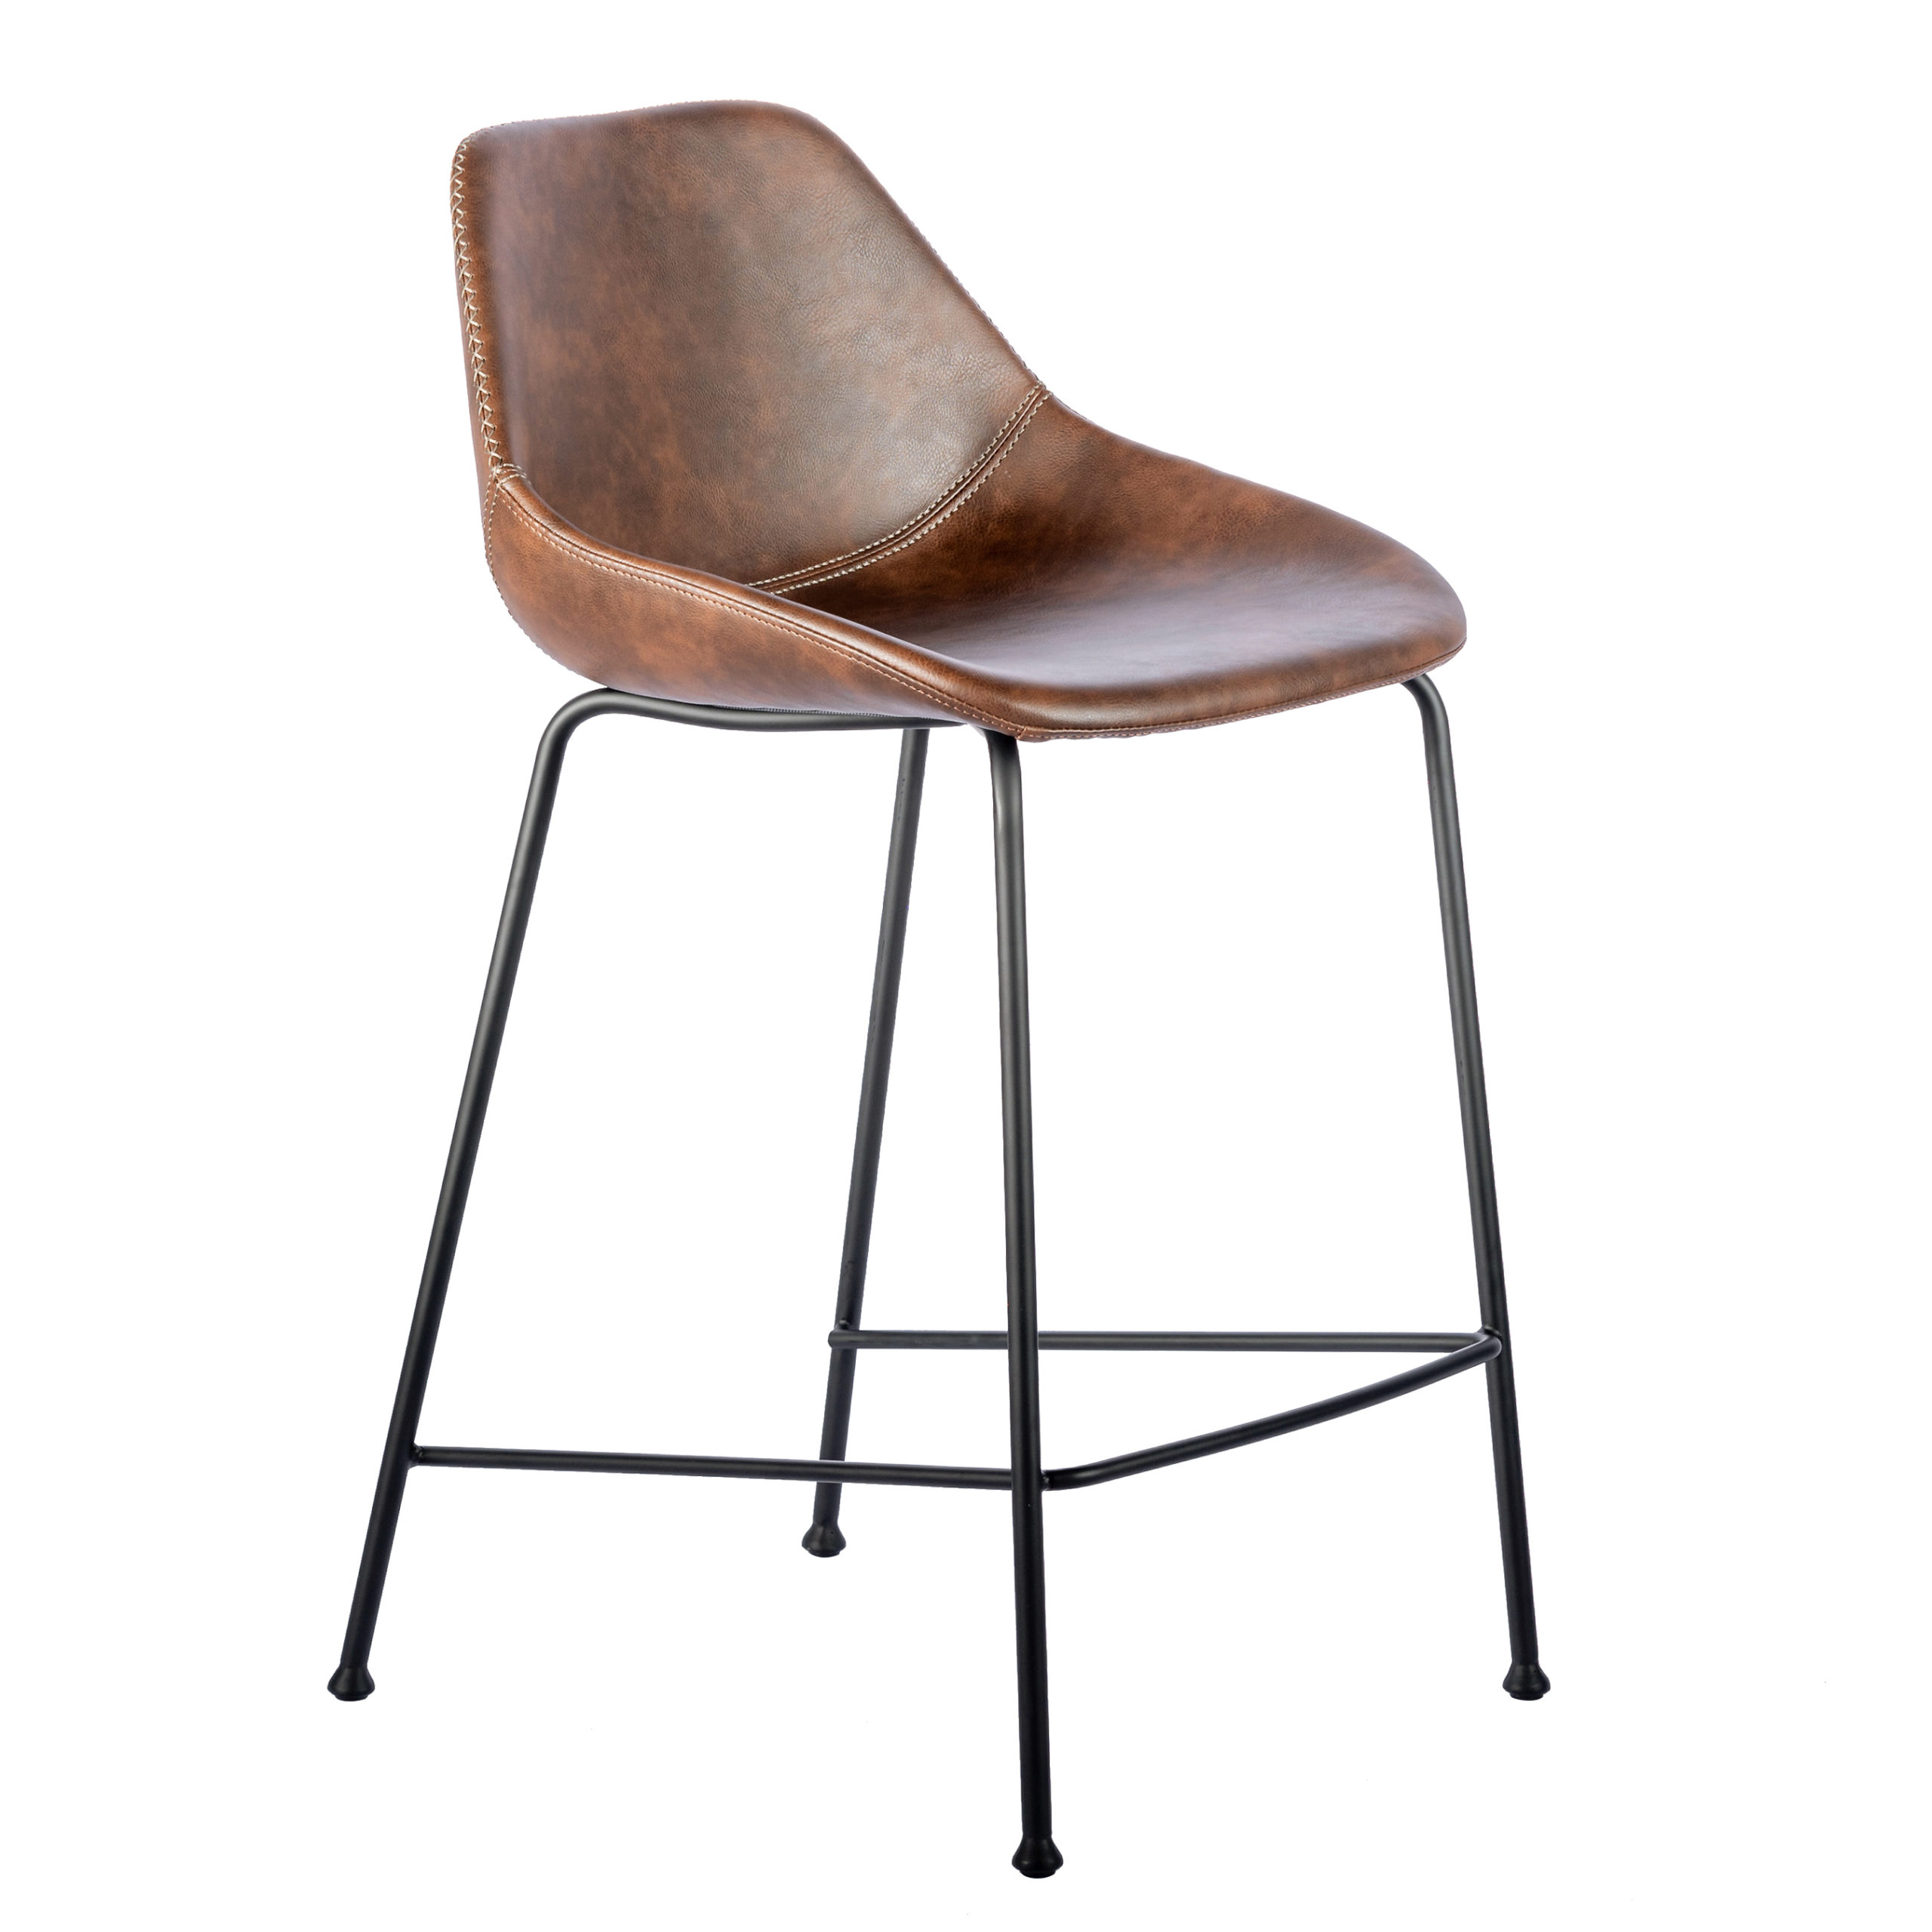 euro-style-corinna-metal-upholstered-stationary-barstool-chair-scaled